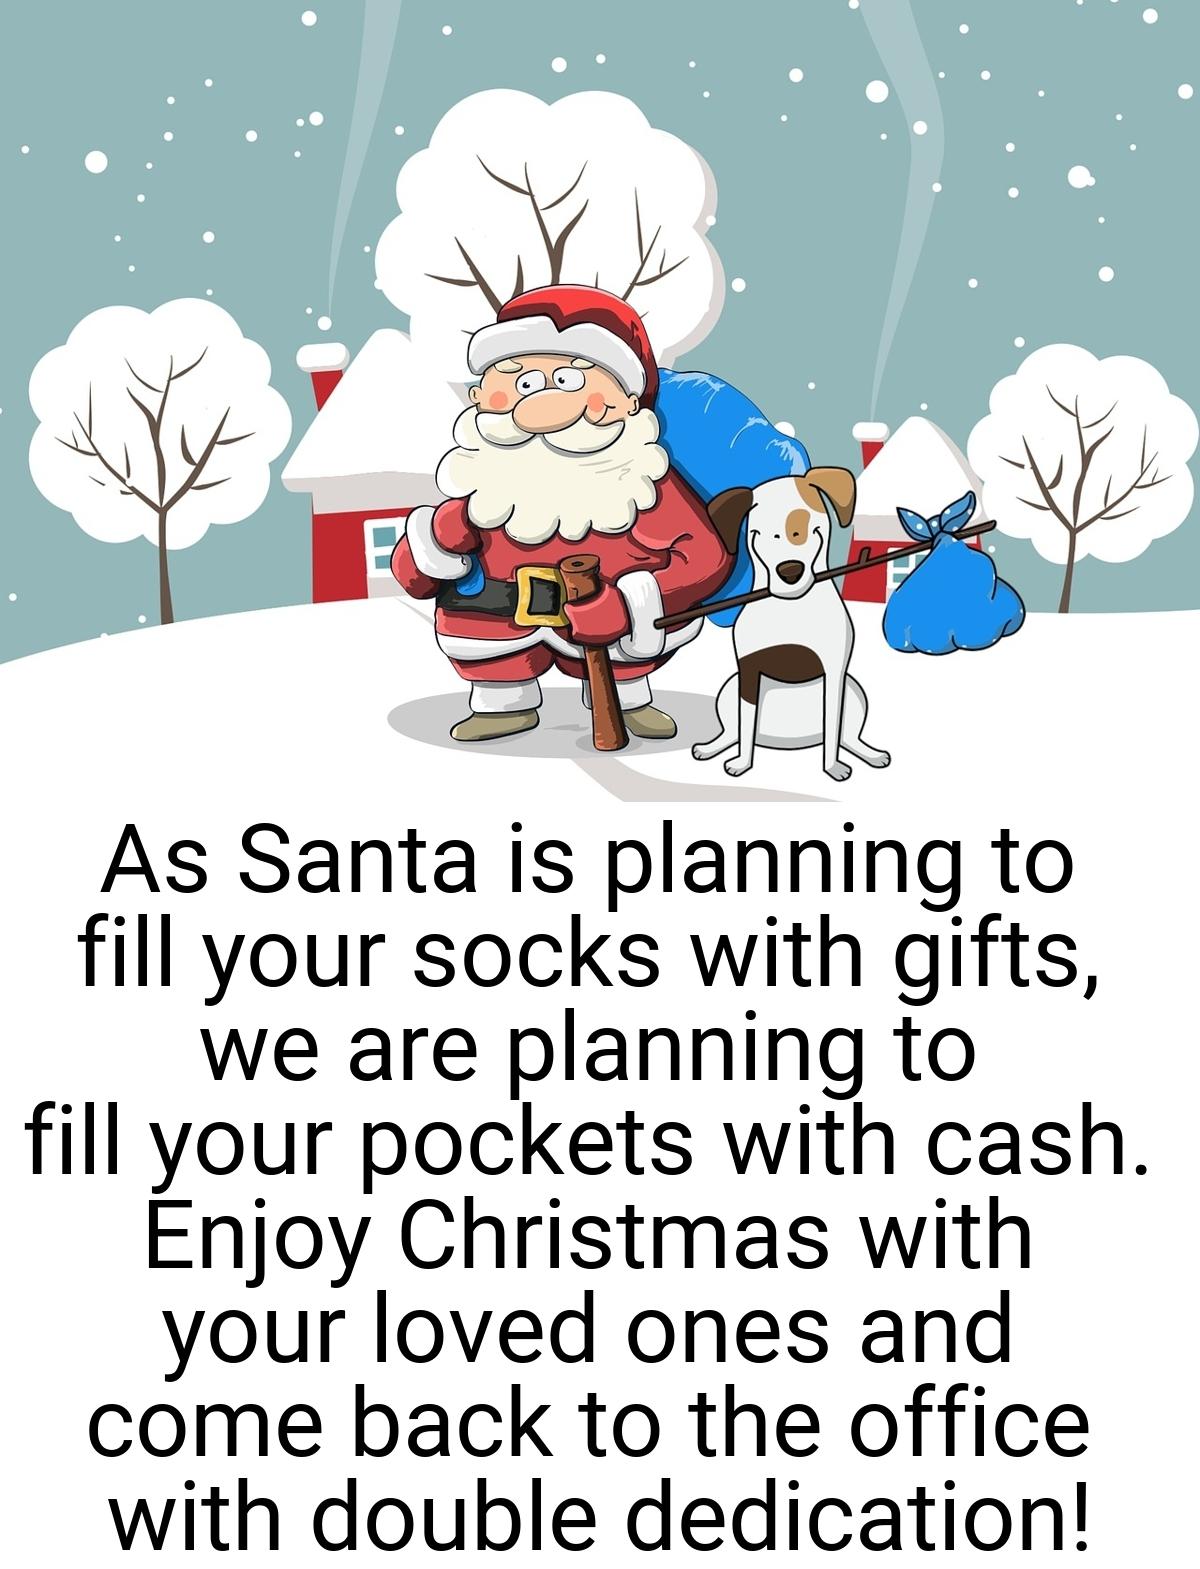 As Santa is planning to fill your socks with gifts, we are